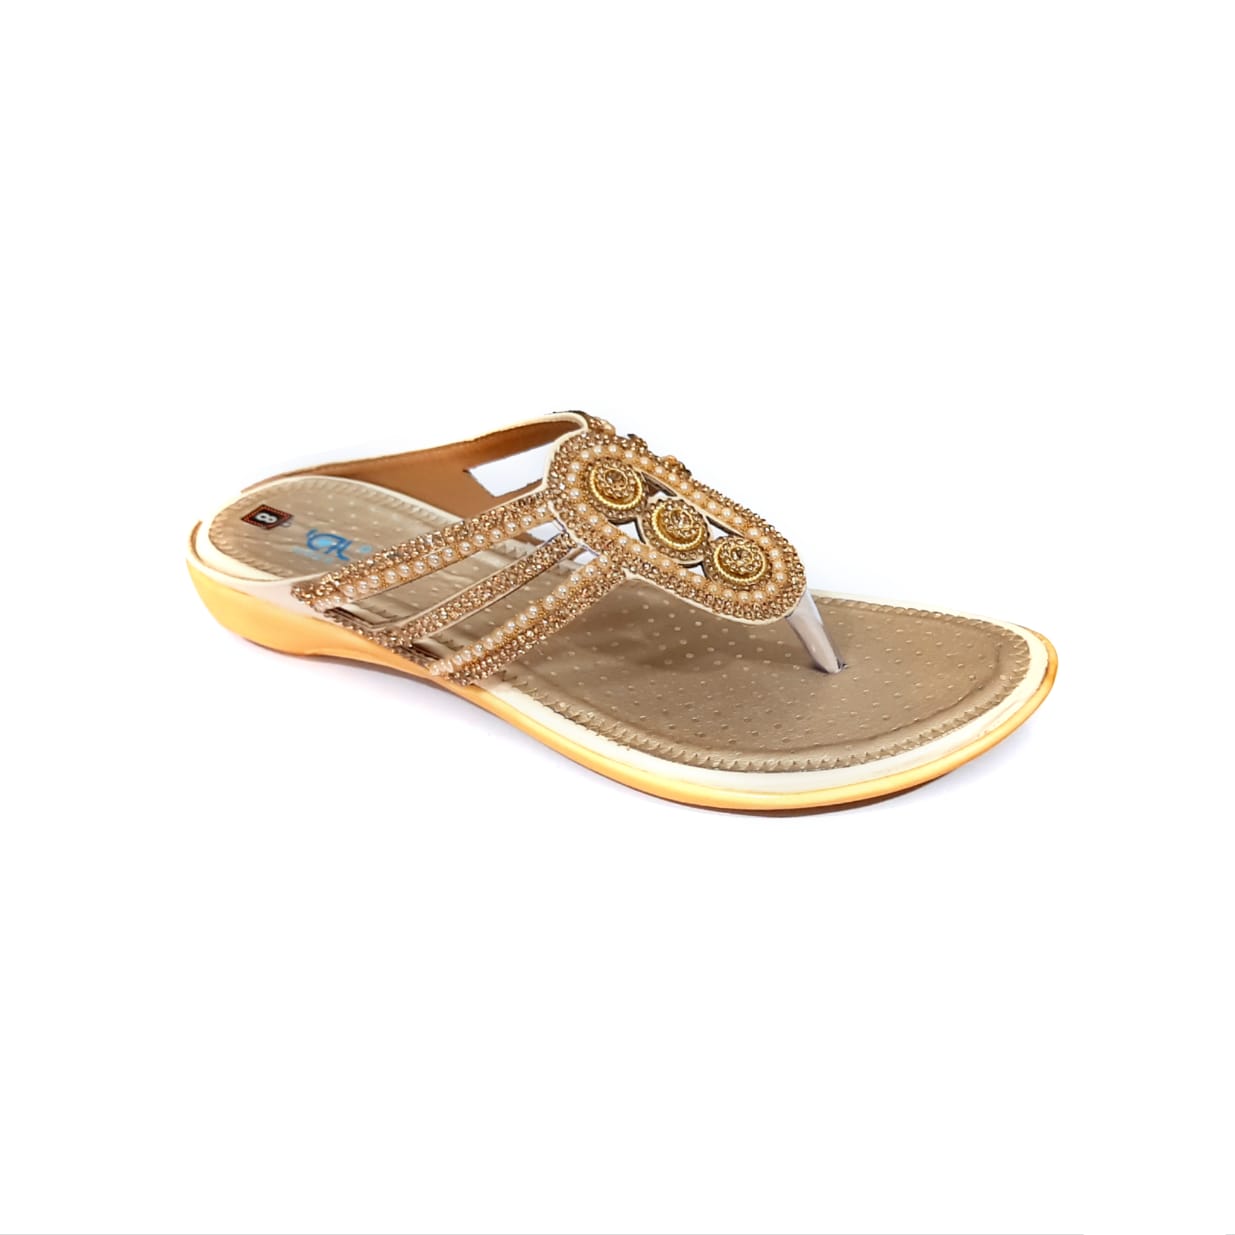 JAl Tan Flat Chappals For Women - Jalshoes